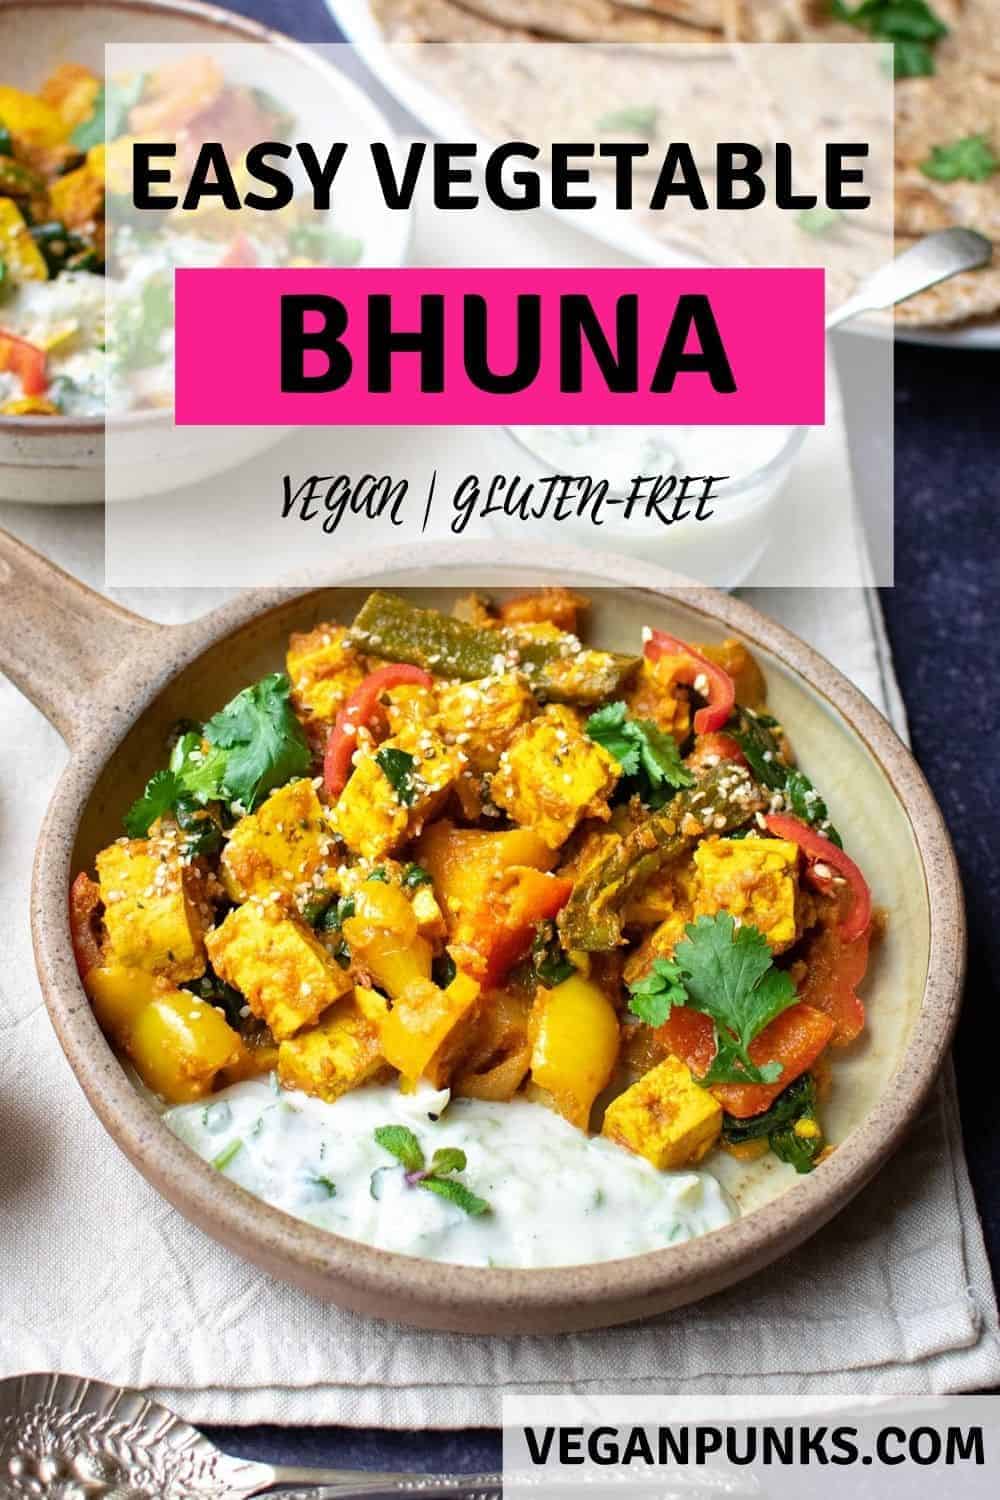 Pinterest image of a bhuna curry in a bowl with the title 'Easy Vegetable Bhuna'